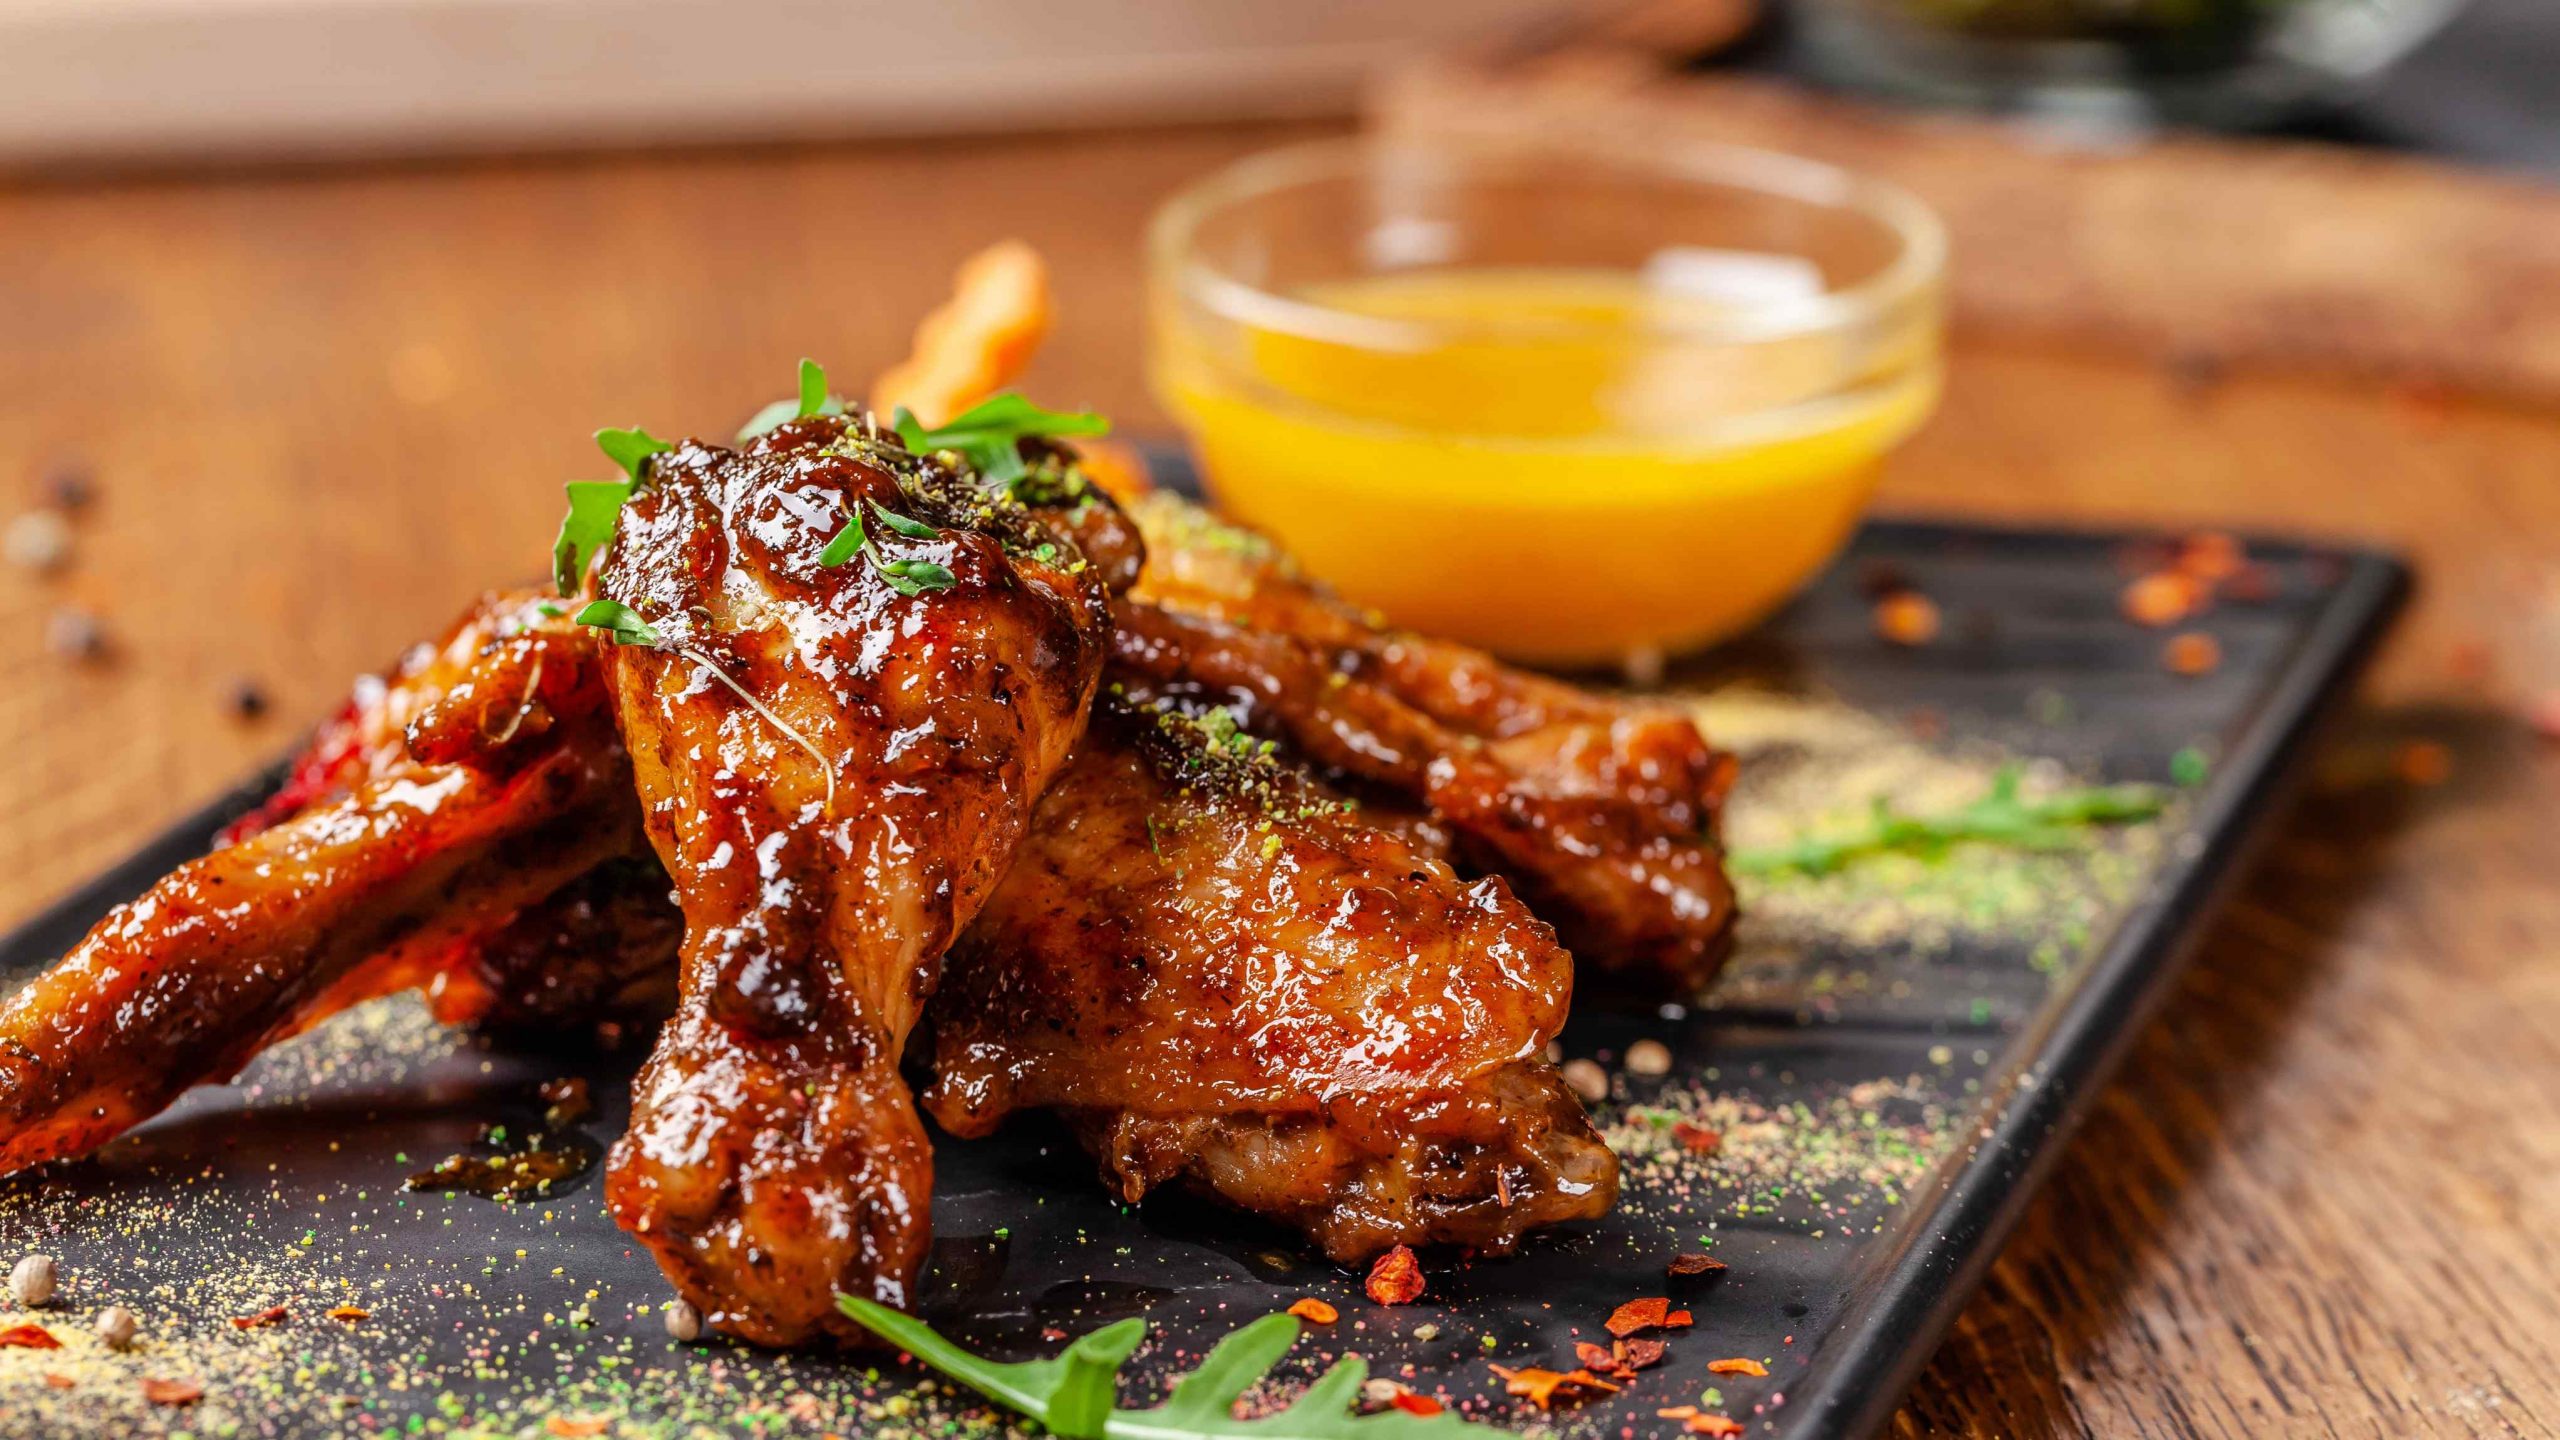 concept-indian-cuisine-baked-chicken-wings-legs-honey-mustard-sauce-serving-dishes-restaurant-black-plate-indian-spices-wooden-table-background-image